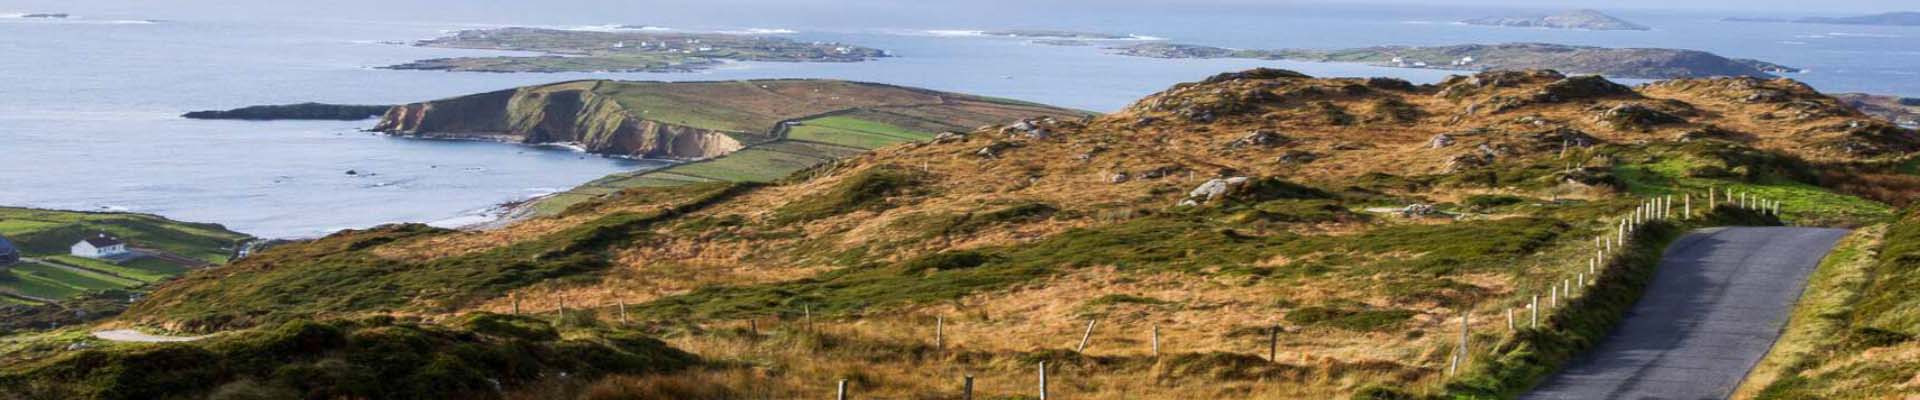 rent a car and travel to connemara sky road on the west of ireland